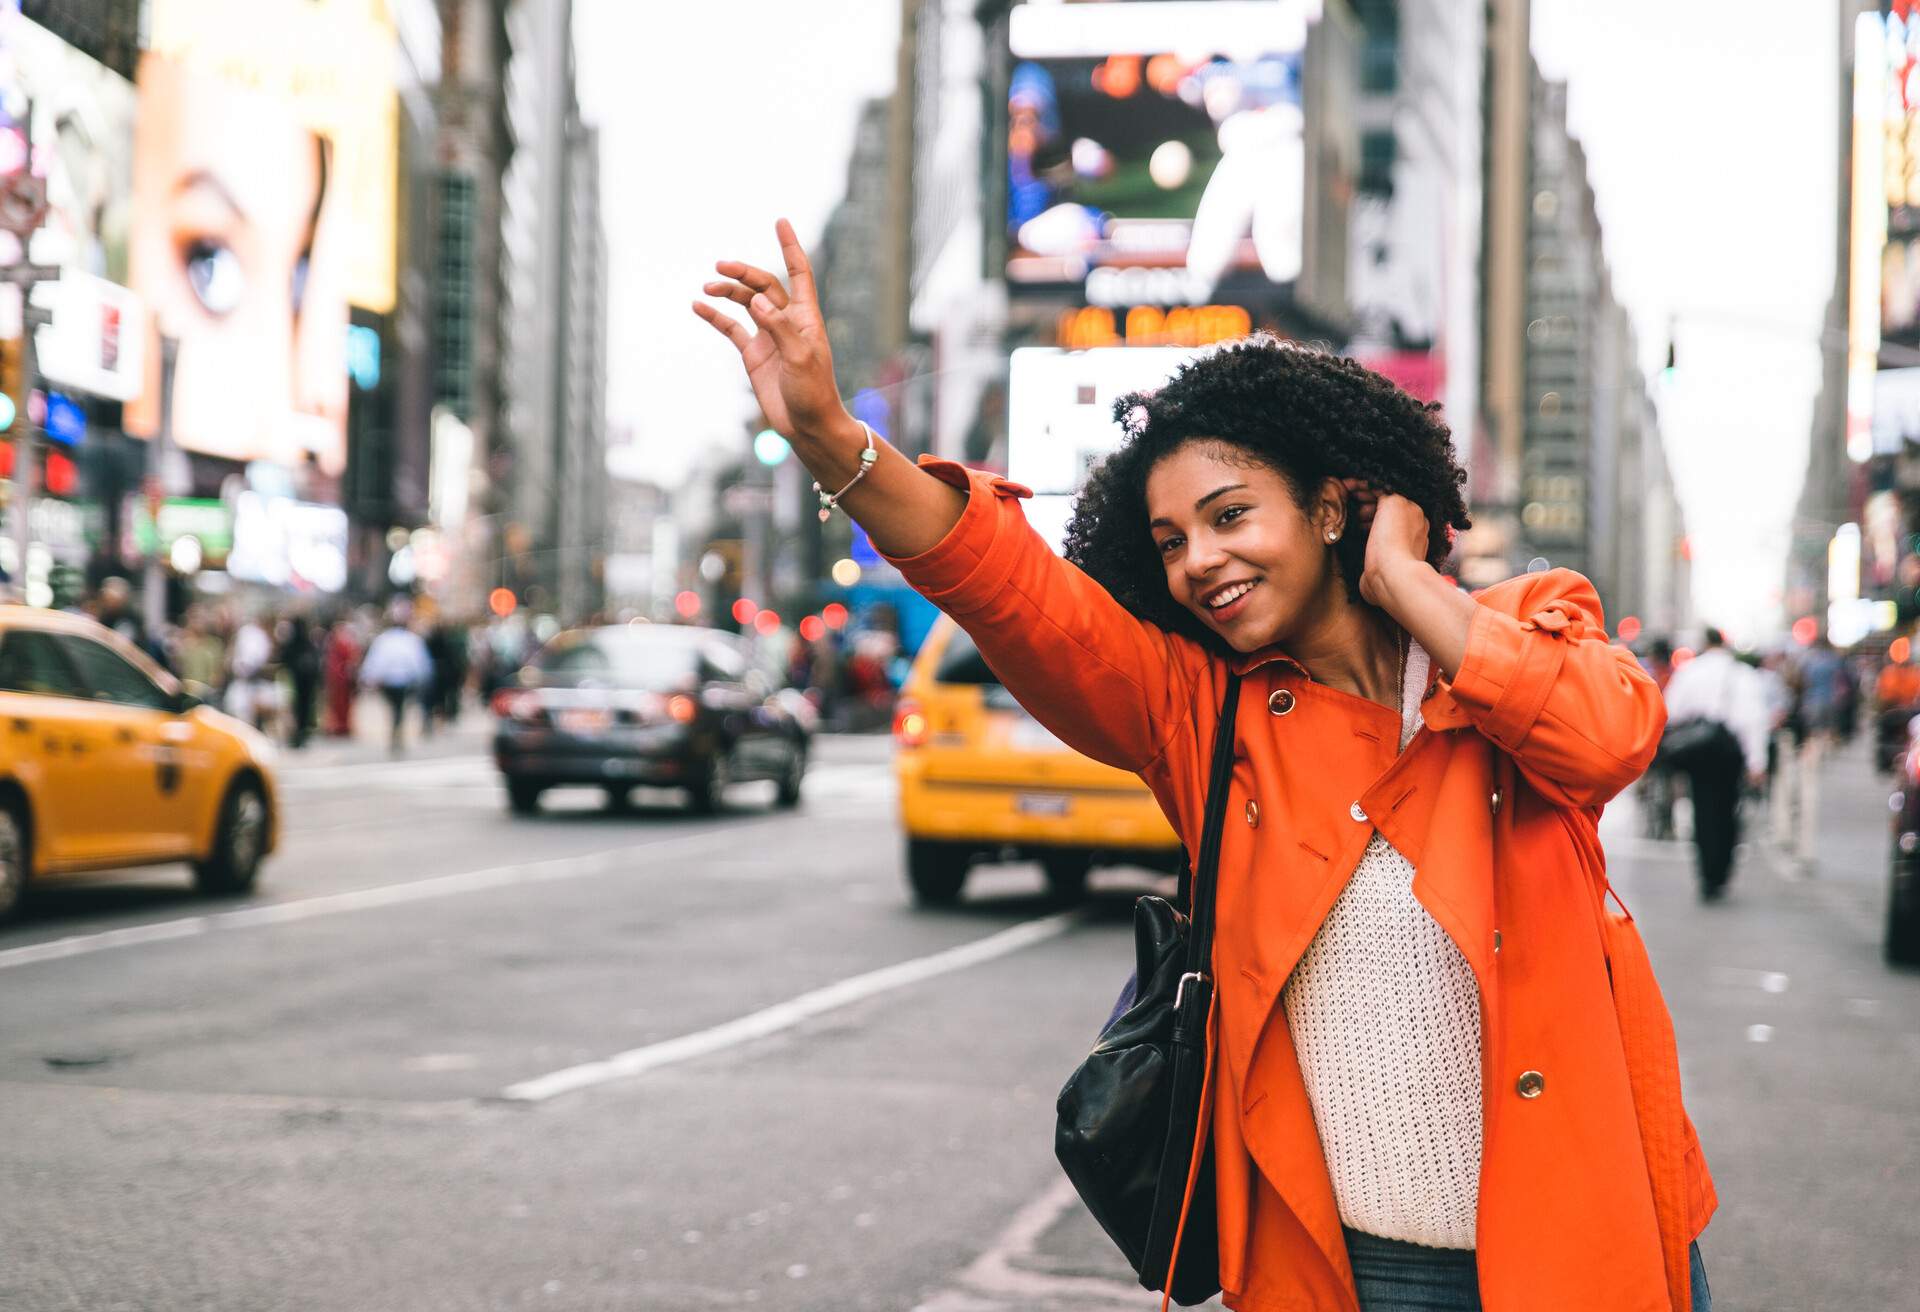 A curly-haired woman in a striking orange coat waves her hands for a cab along a busy street.